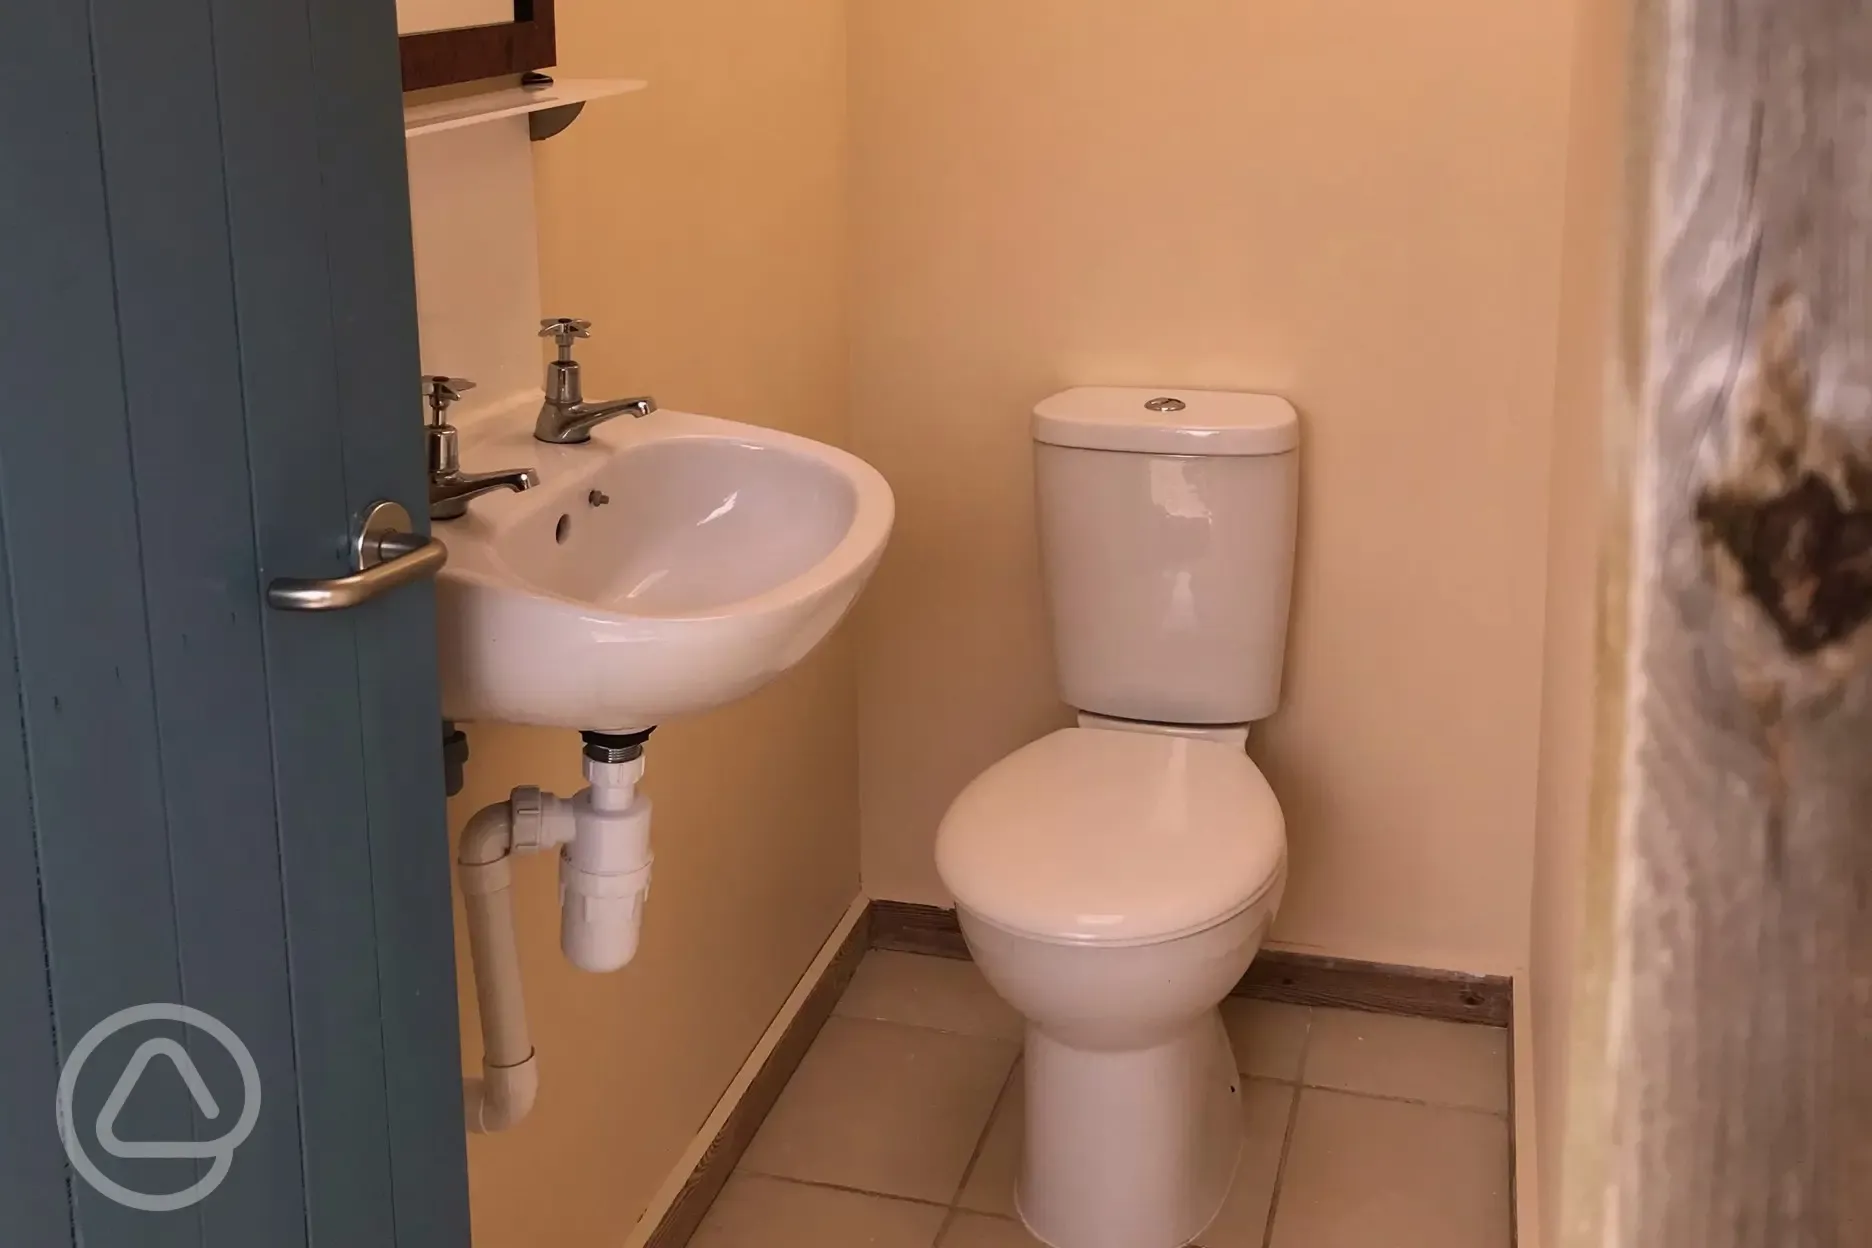 One of the private toilets